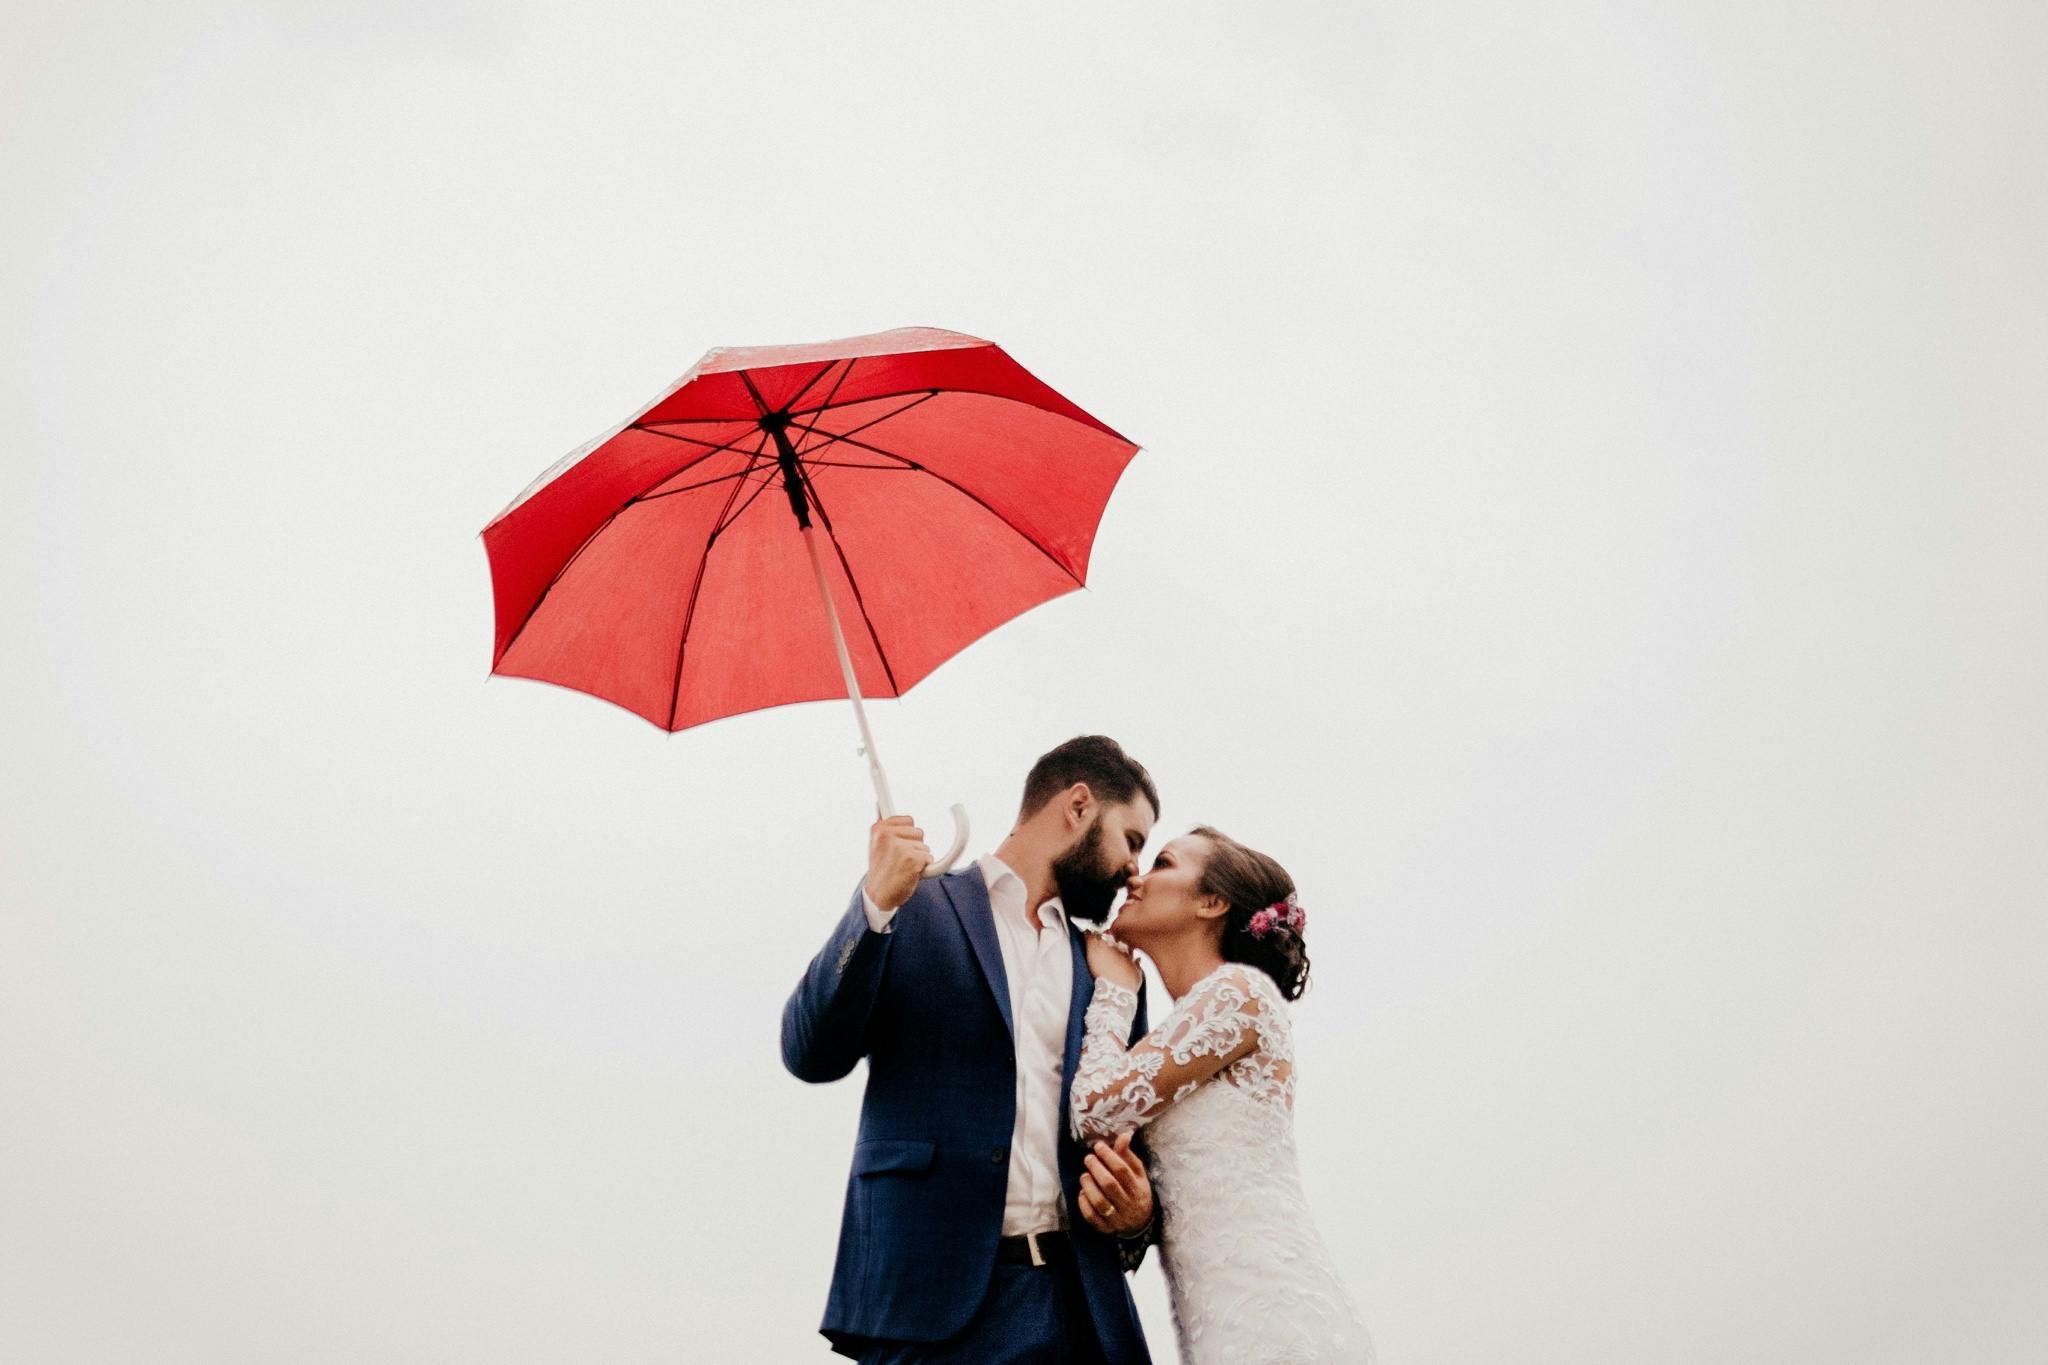 Couple with a red umbrella